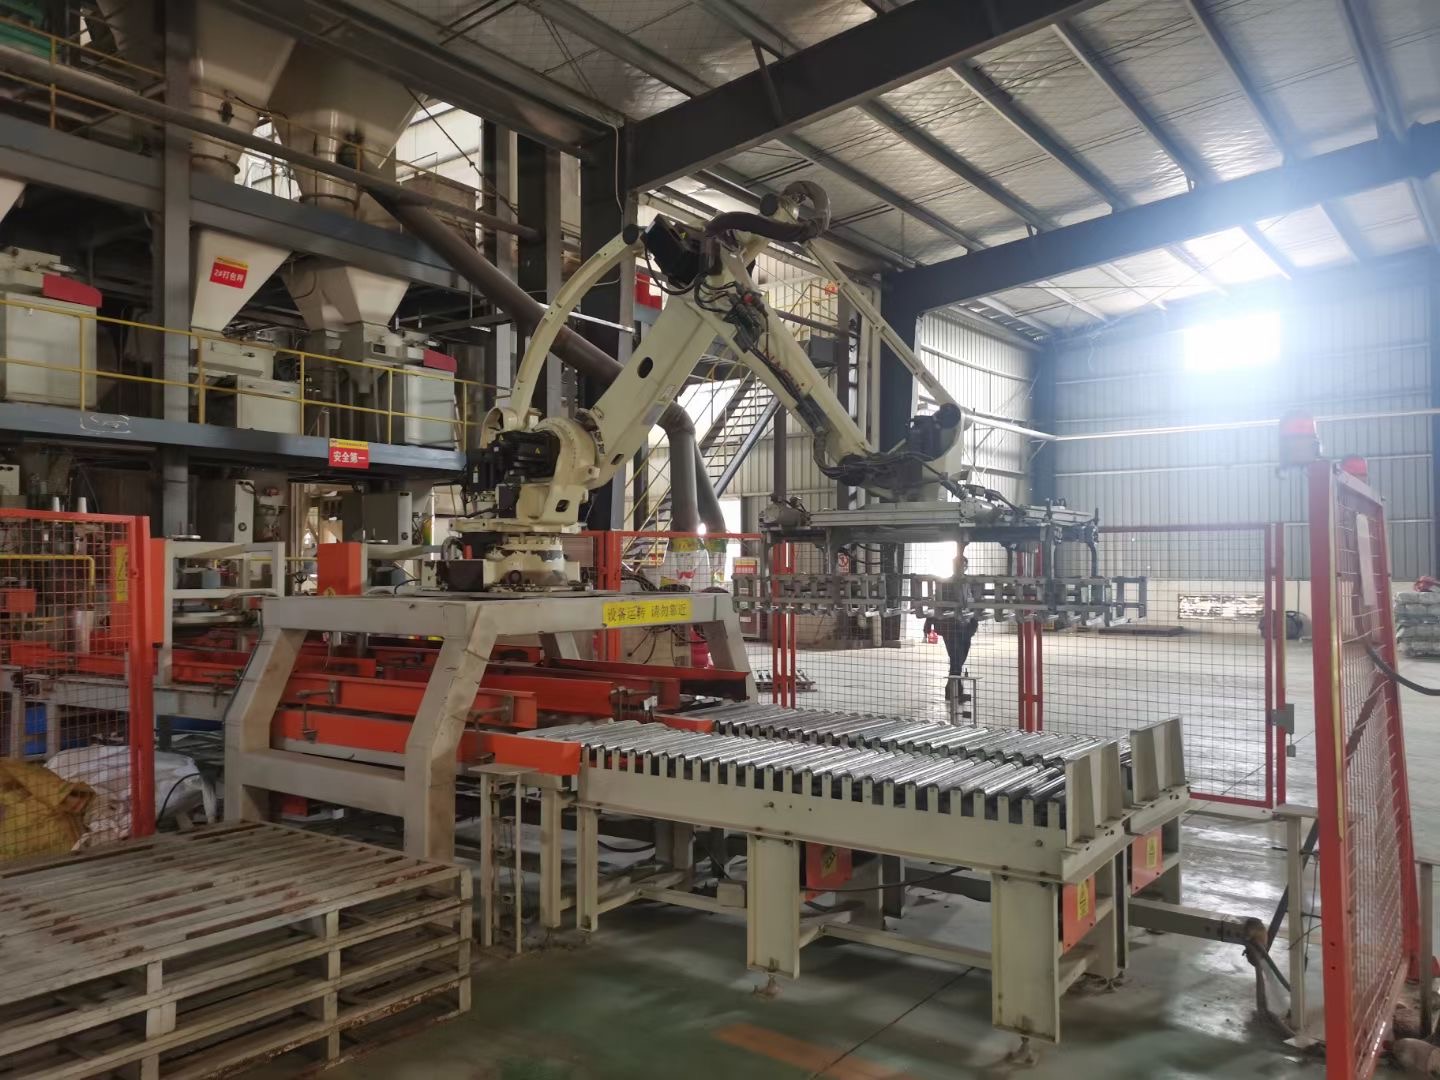 bulk bagger & palletiser plant Fully Automatic Packing and Palletizing Line automated bagging system automated bagging machine, Fully Automatic Packing Palletizing Line, Fully Automatic Packing Line, 